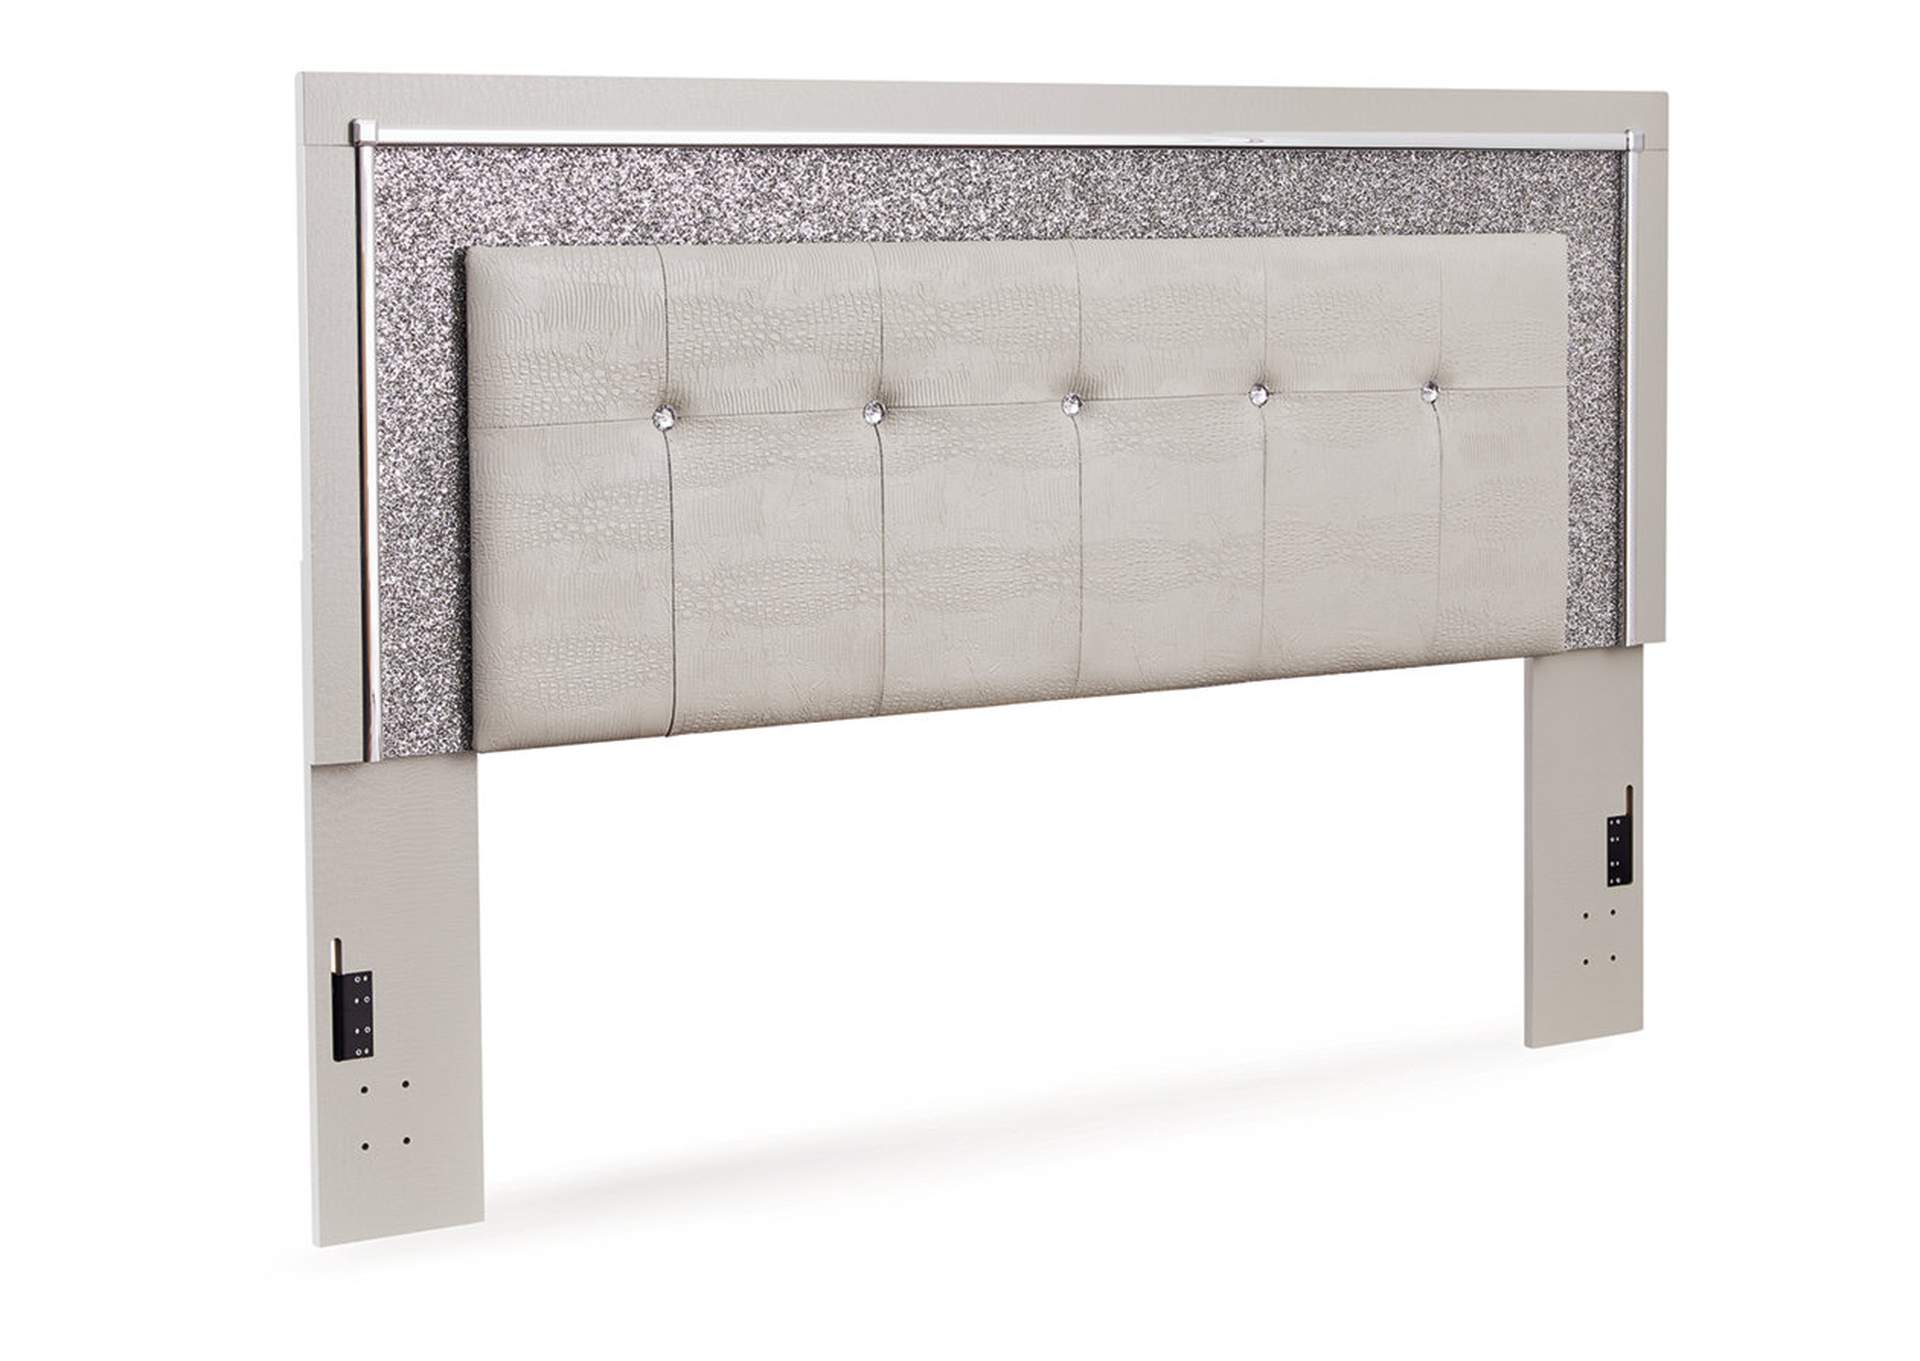 Zyniden King Upholstered Panel Headboard,Signature Design By Ashley